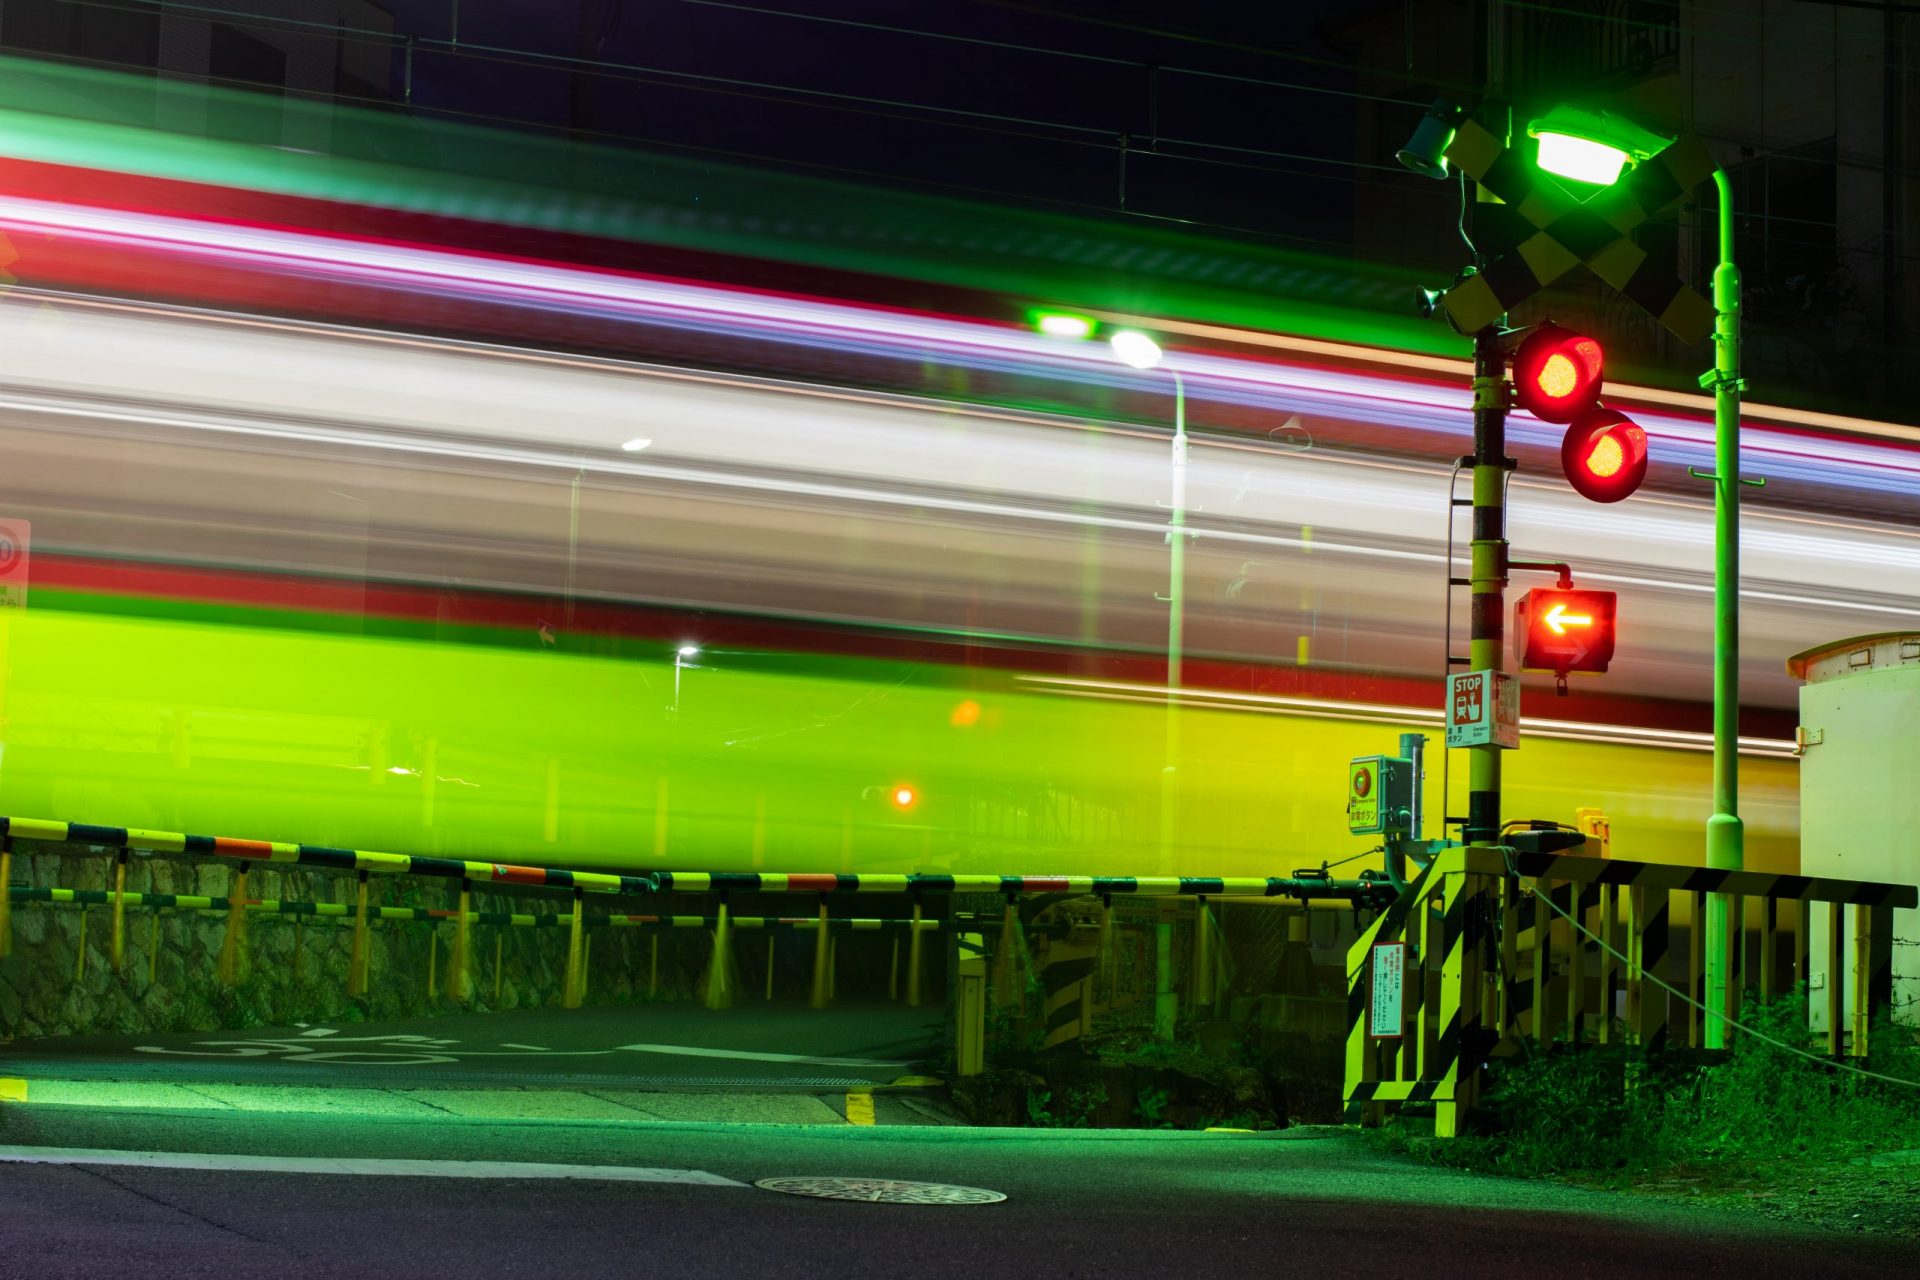 You are currently viewing Photographing the train crossings of Kyoto